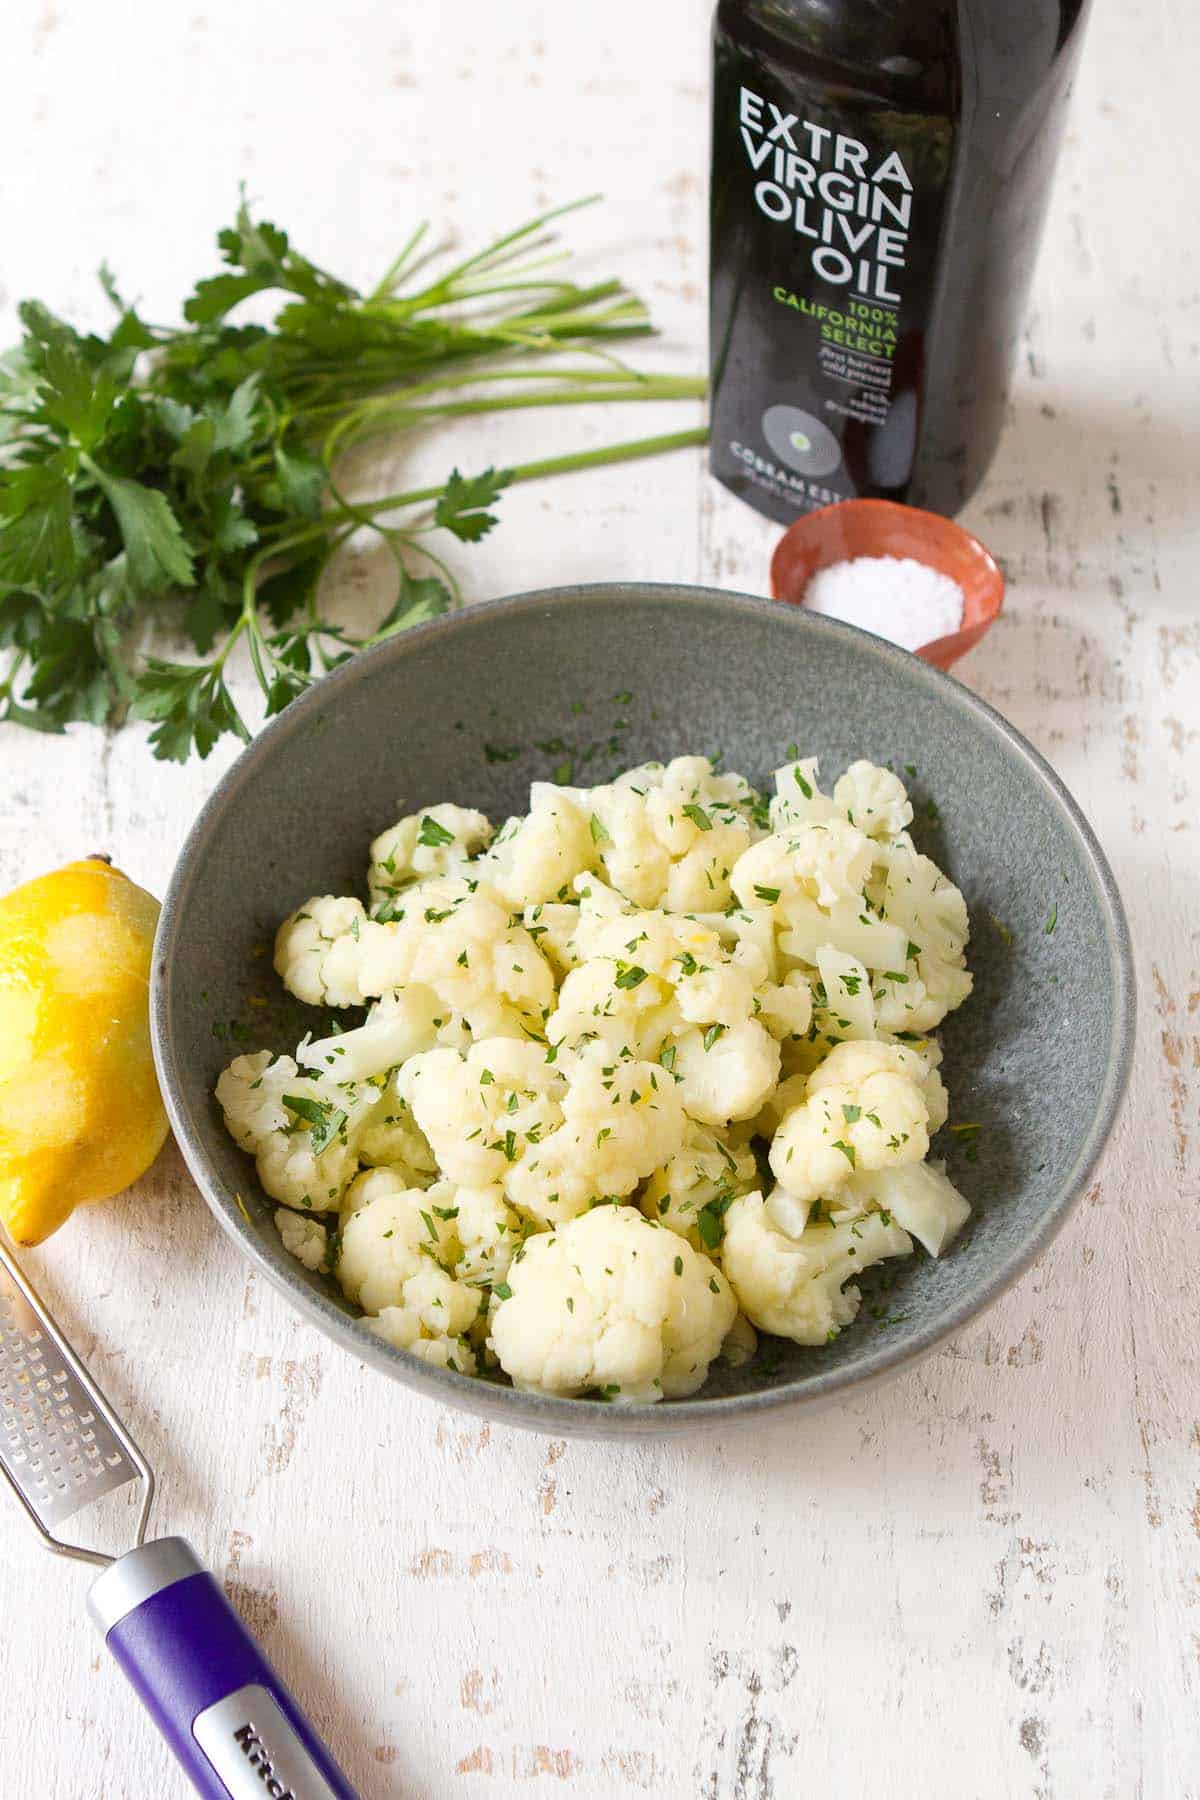 Cooked cauliflower florets in a gray bowl, surrounded by a lemon, parsley and olive oil.